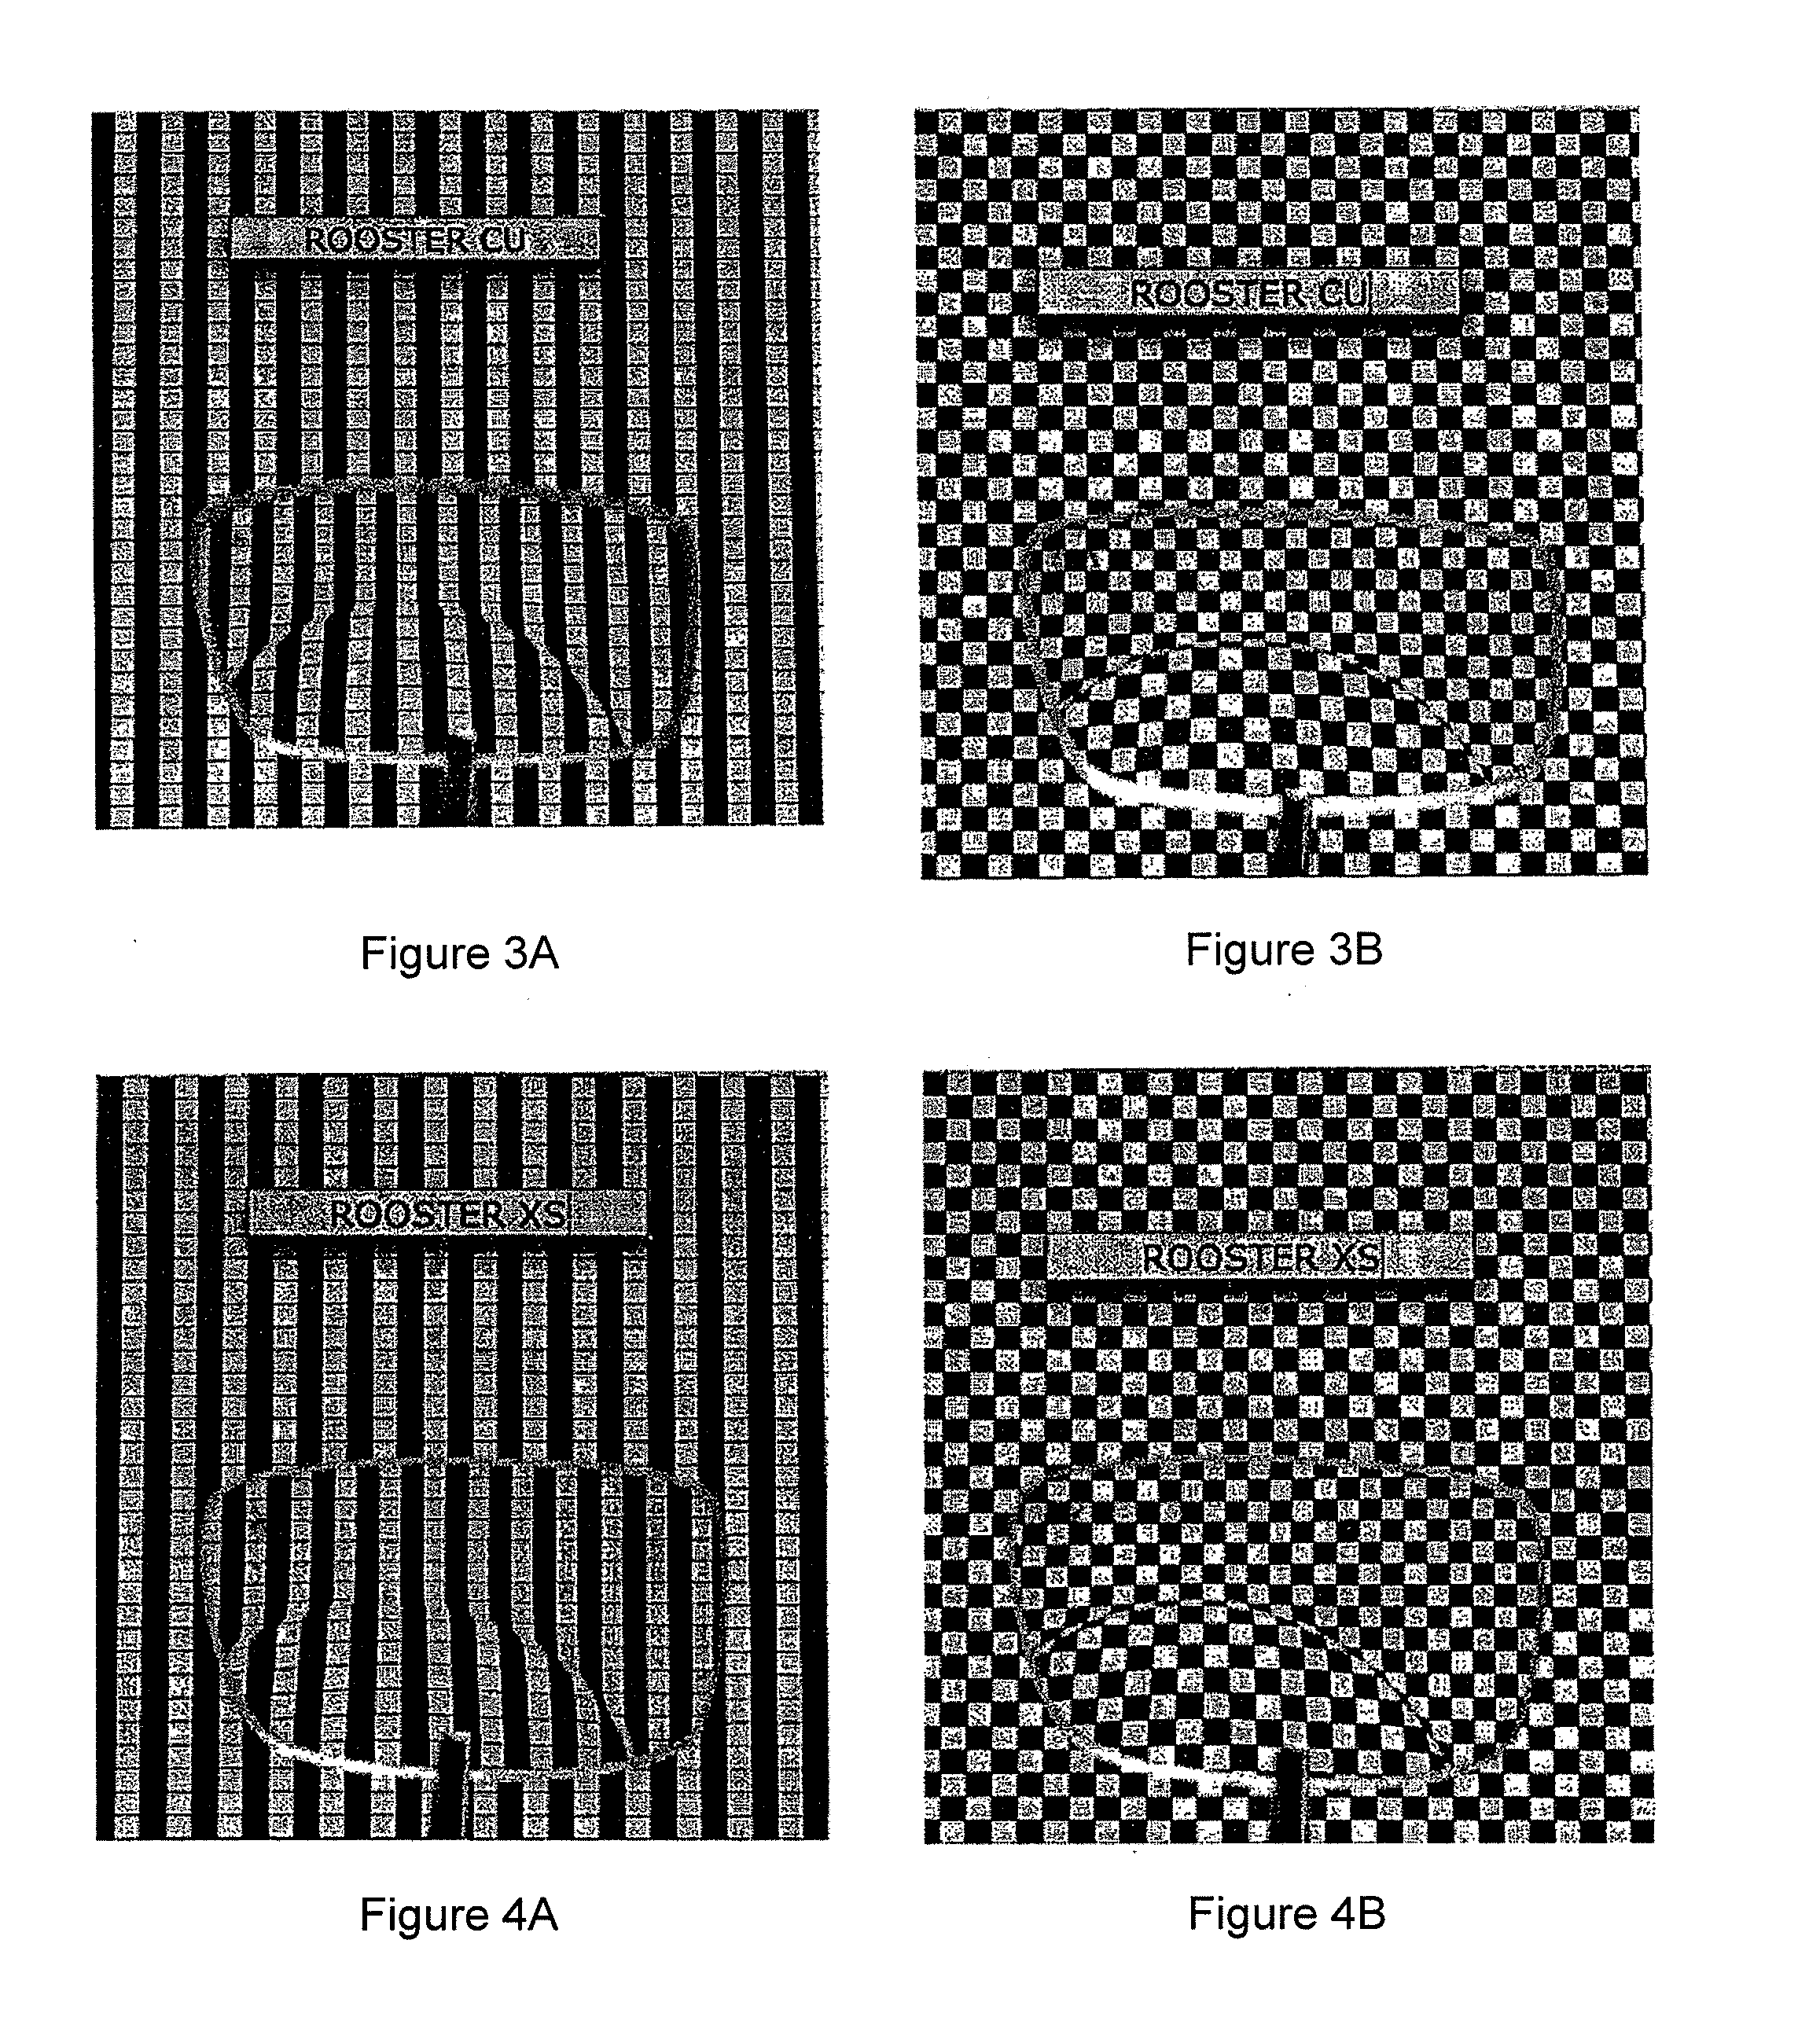 Multifocal lens having a progressive optical power region and a discontinuity